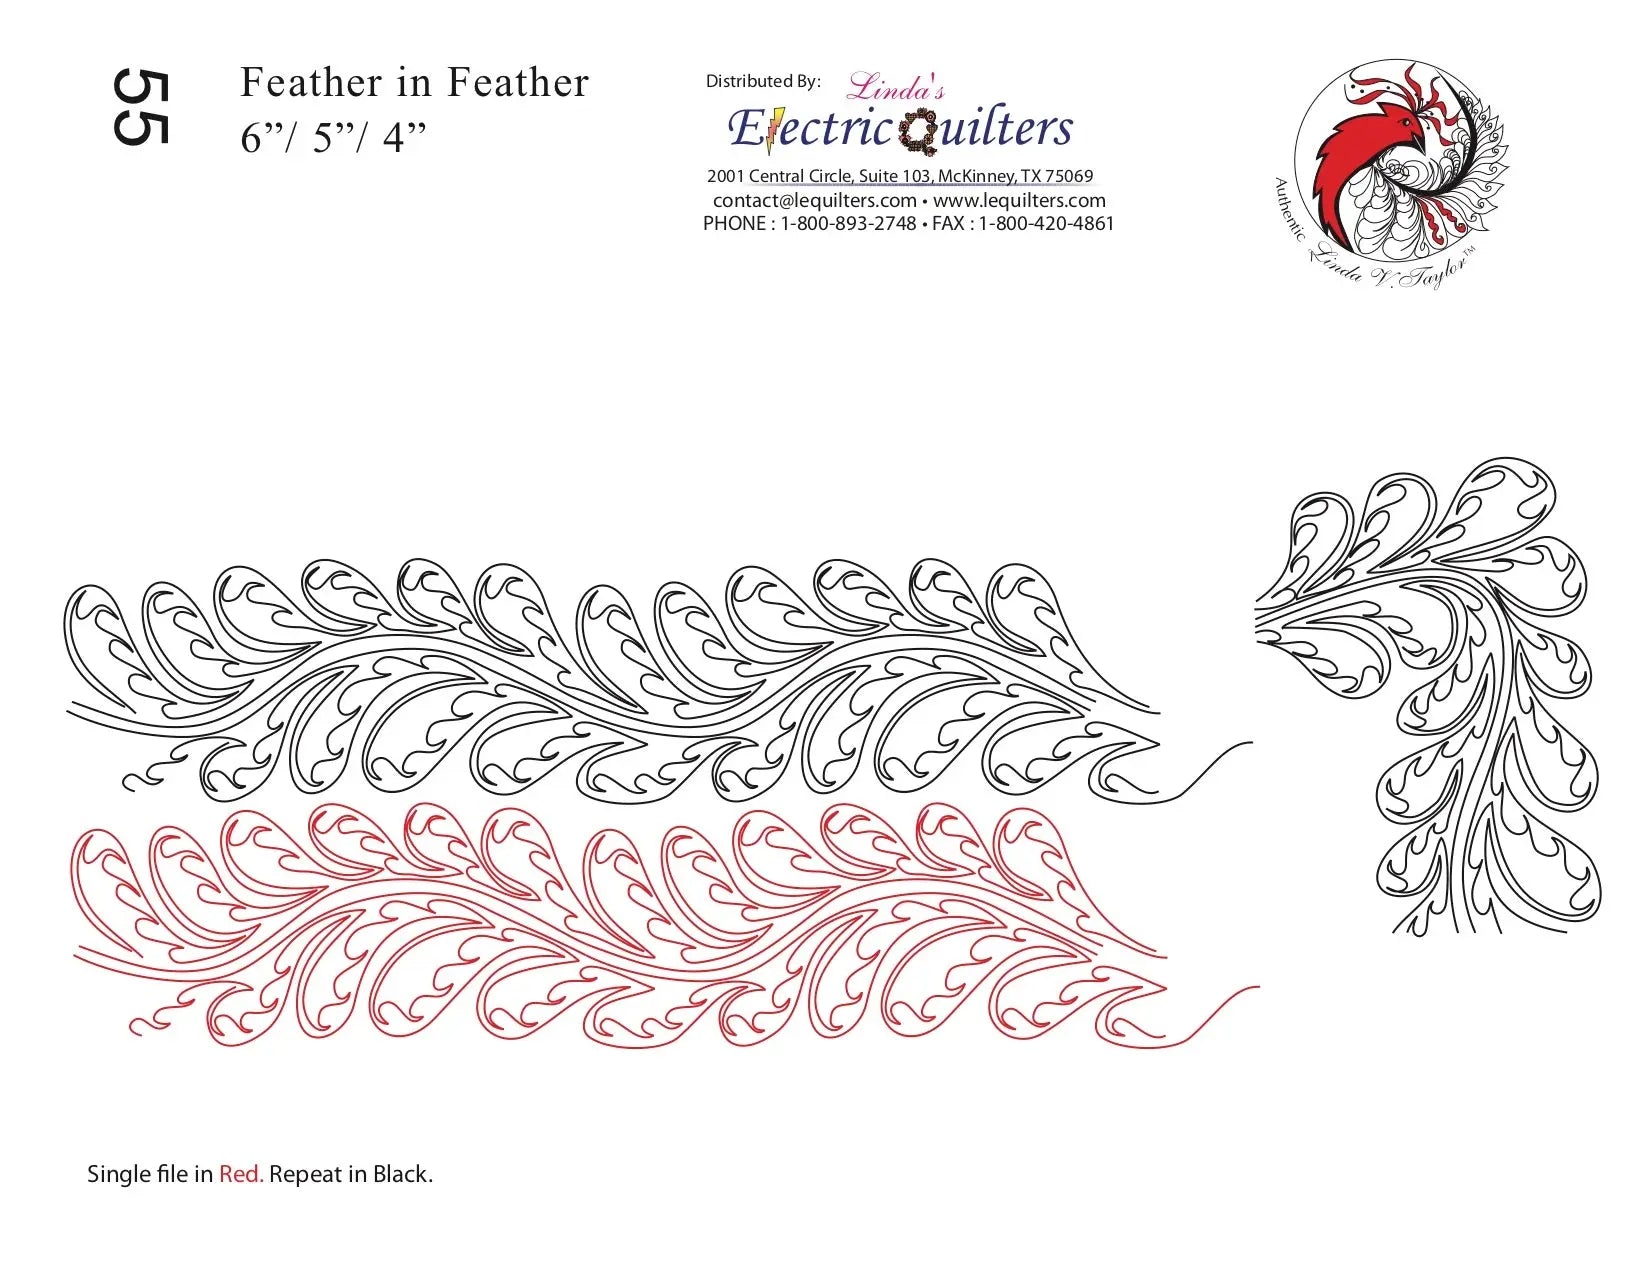 055 Feather In Feather Pantograph by Linda V. Taylor - Linda's Electric Quilters